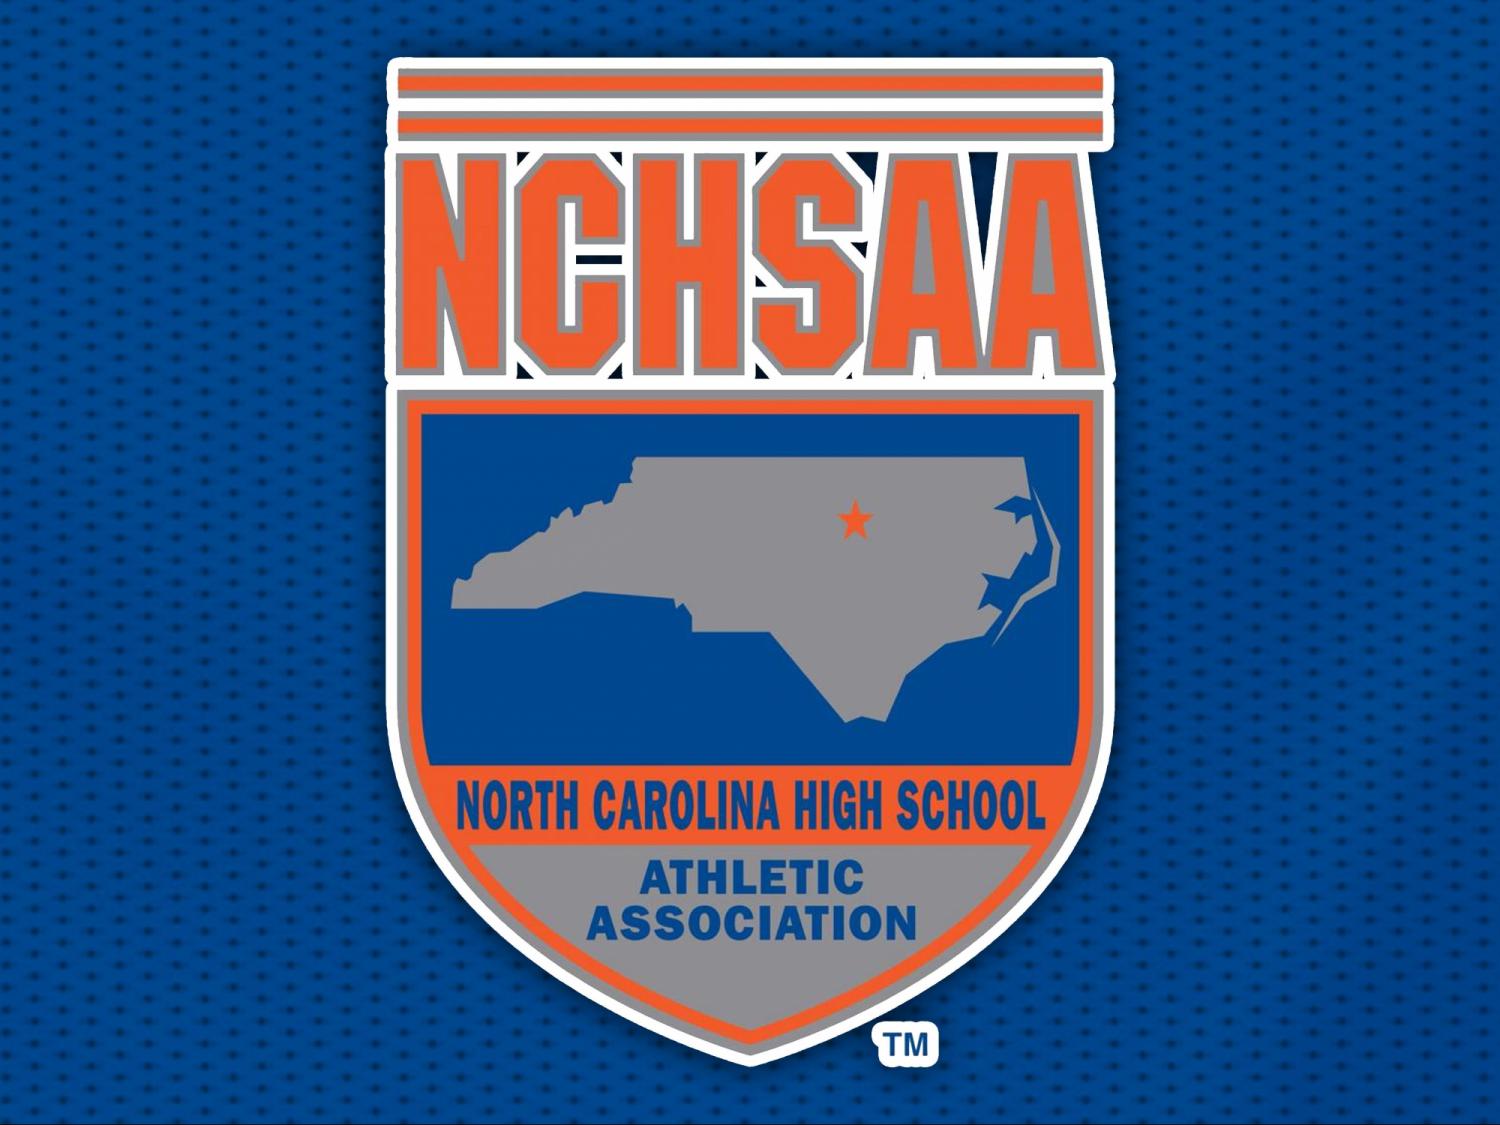 Realignment, sportsmanship issues among topics NCHSAA board will discuss at spring meeting